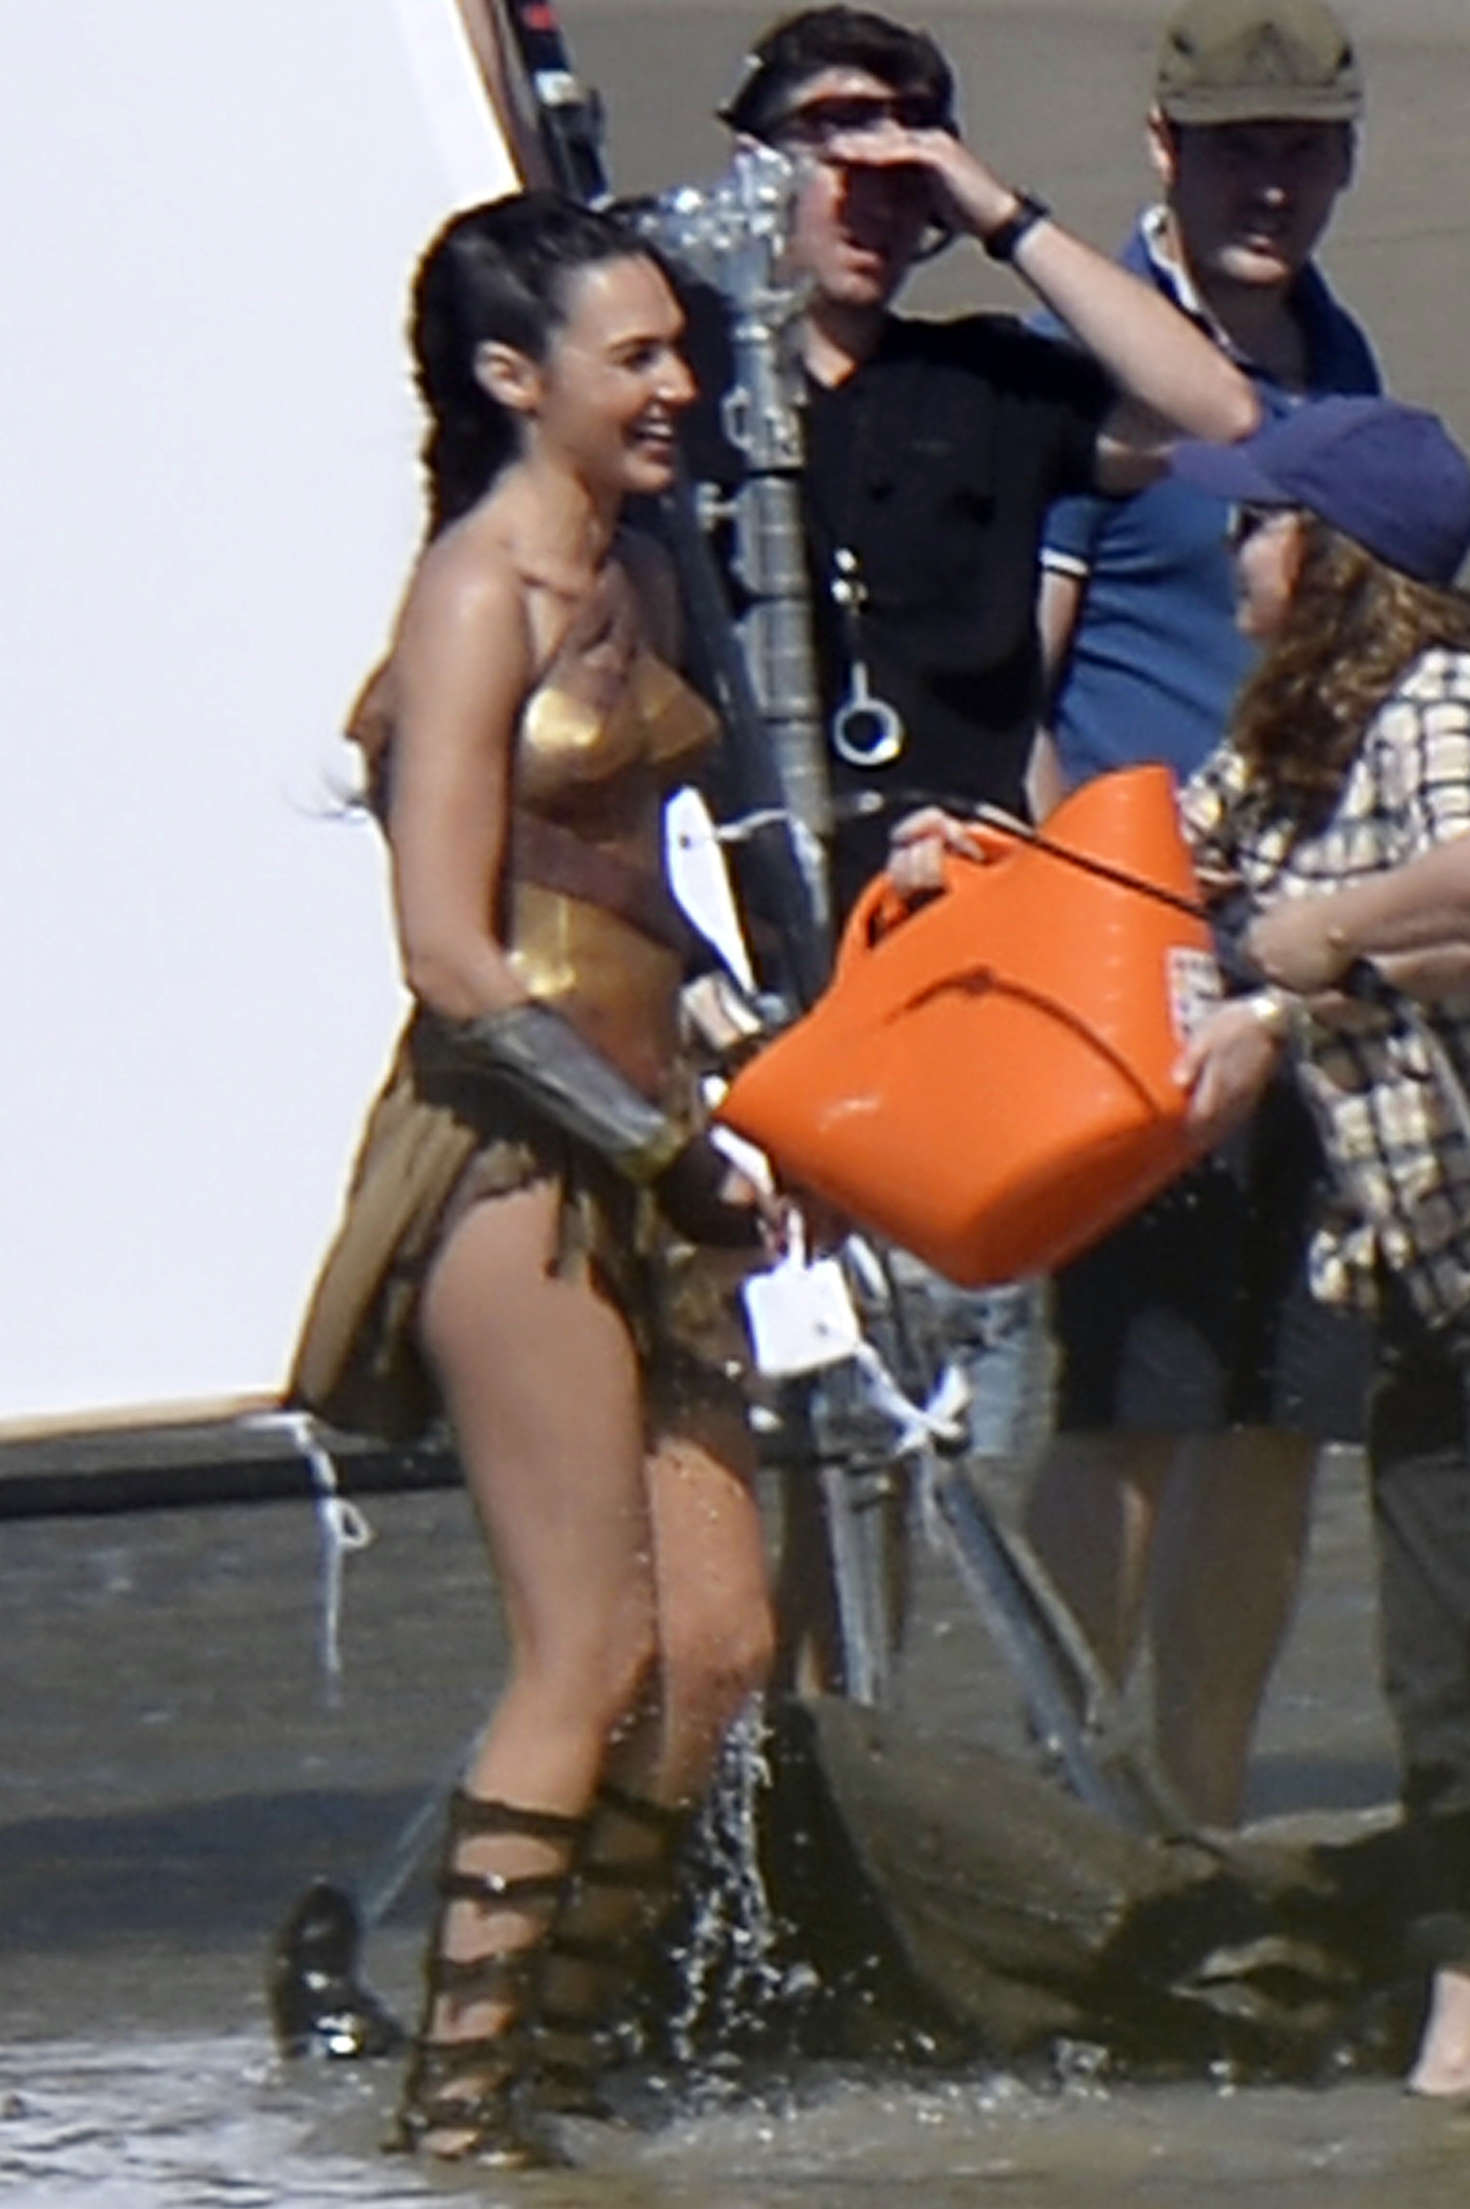 Gal Gadot On The Set Of Wonder Woman On The Beach In Italy Gotceleb Gadot is known for her role as gisele in the fast and the furious film series. gal gadot on the set of wonder woman